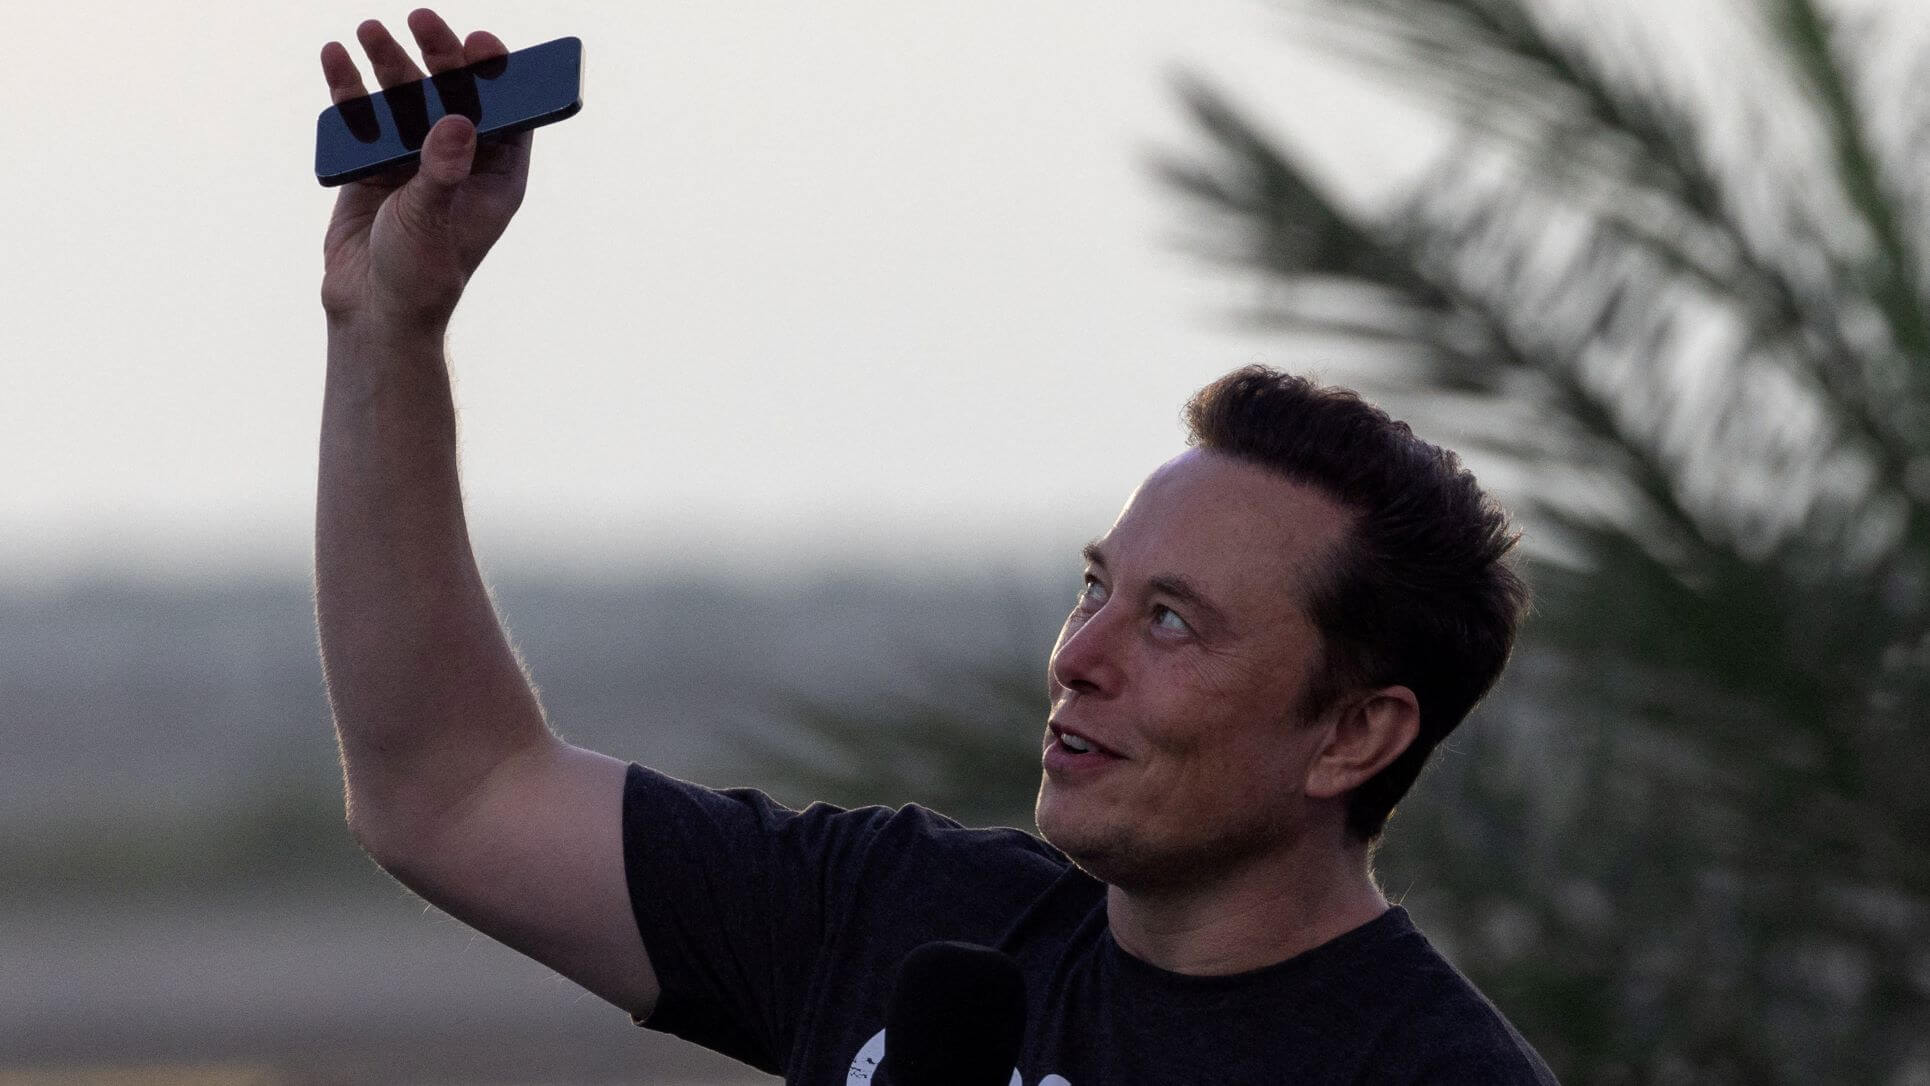 Musk Reverses Course, Again: He's Ready To Buy Twitter, Build 'X' App